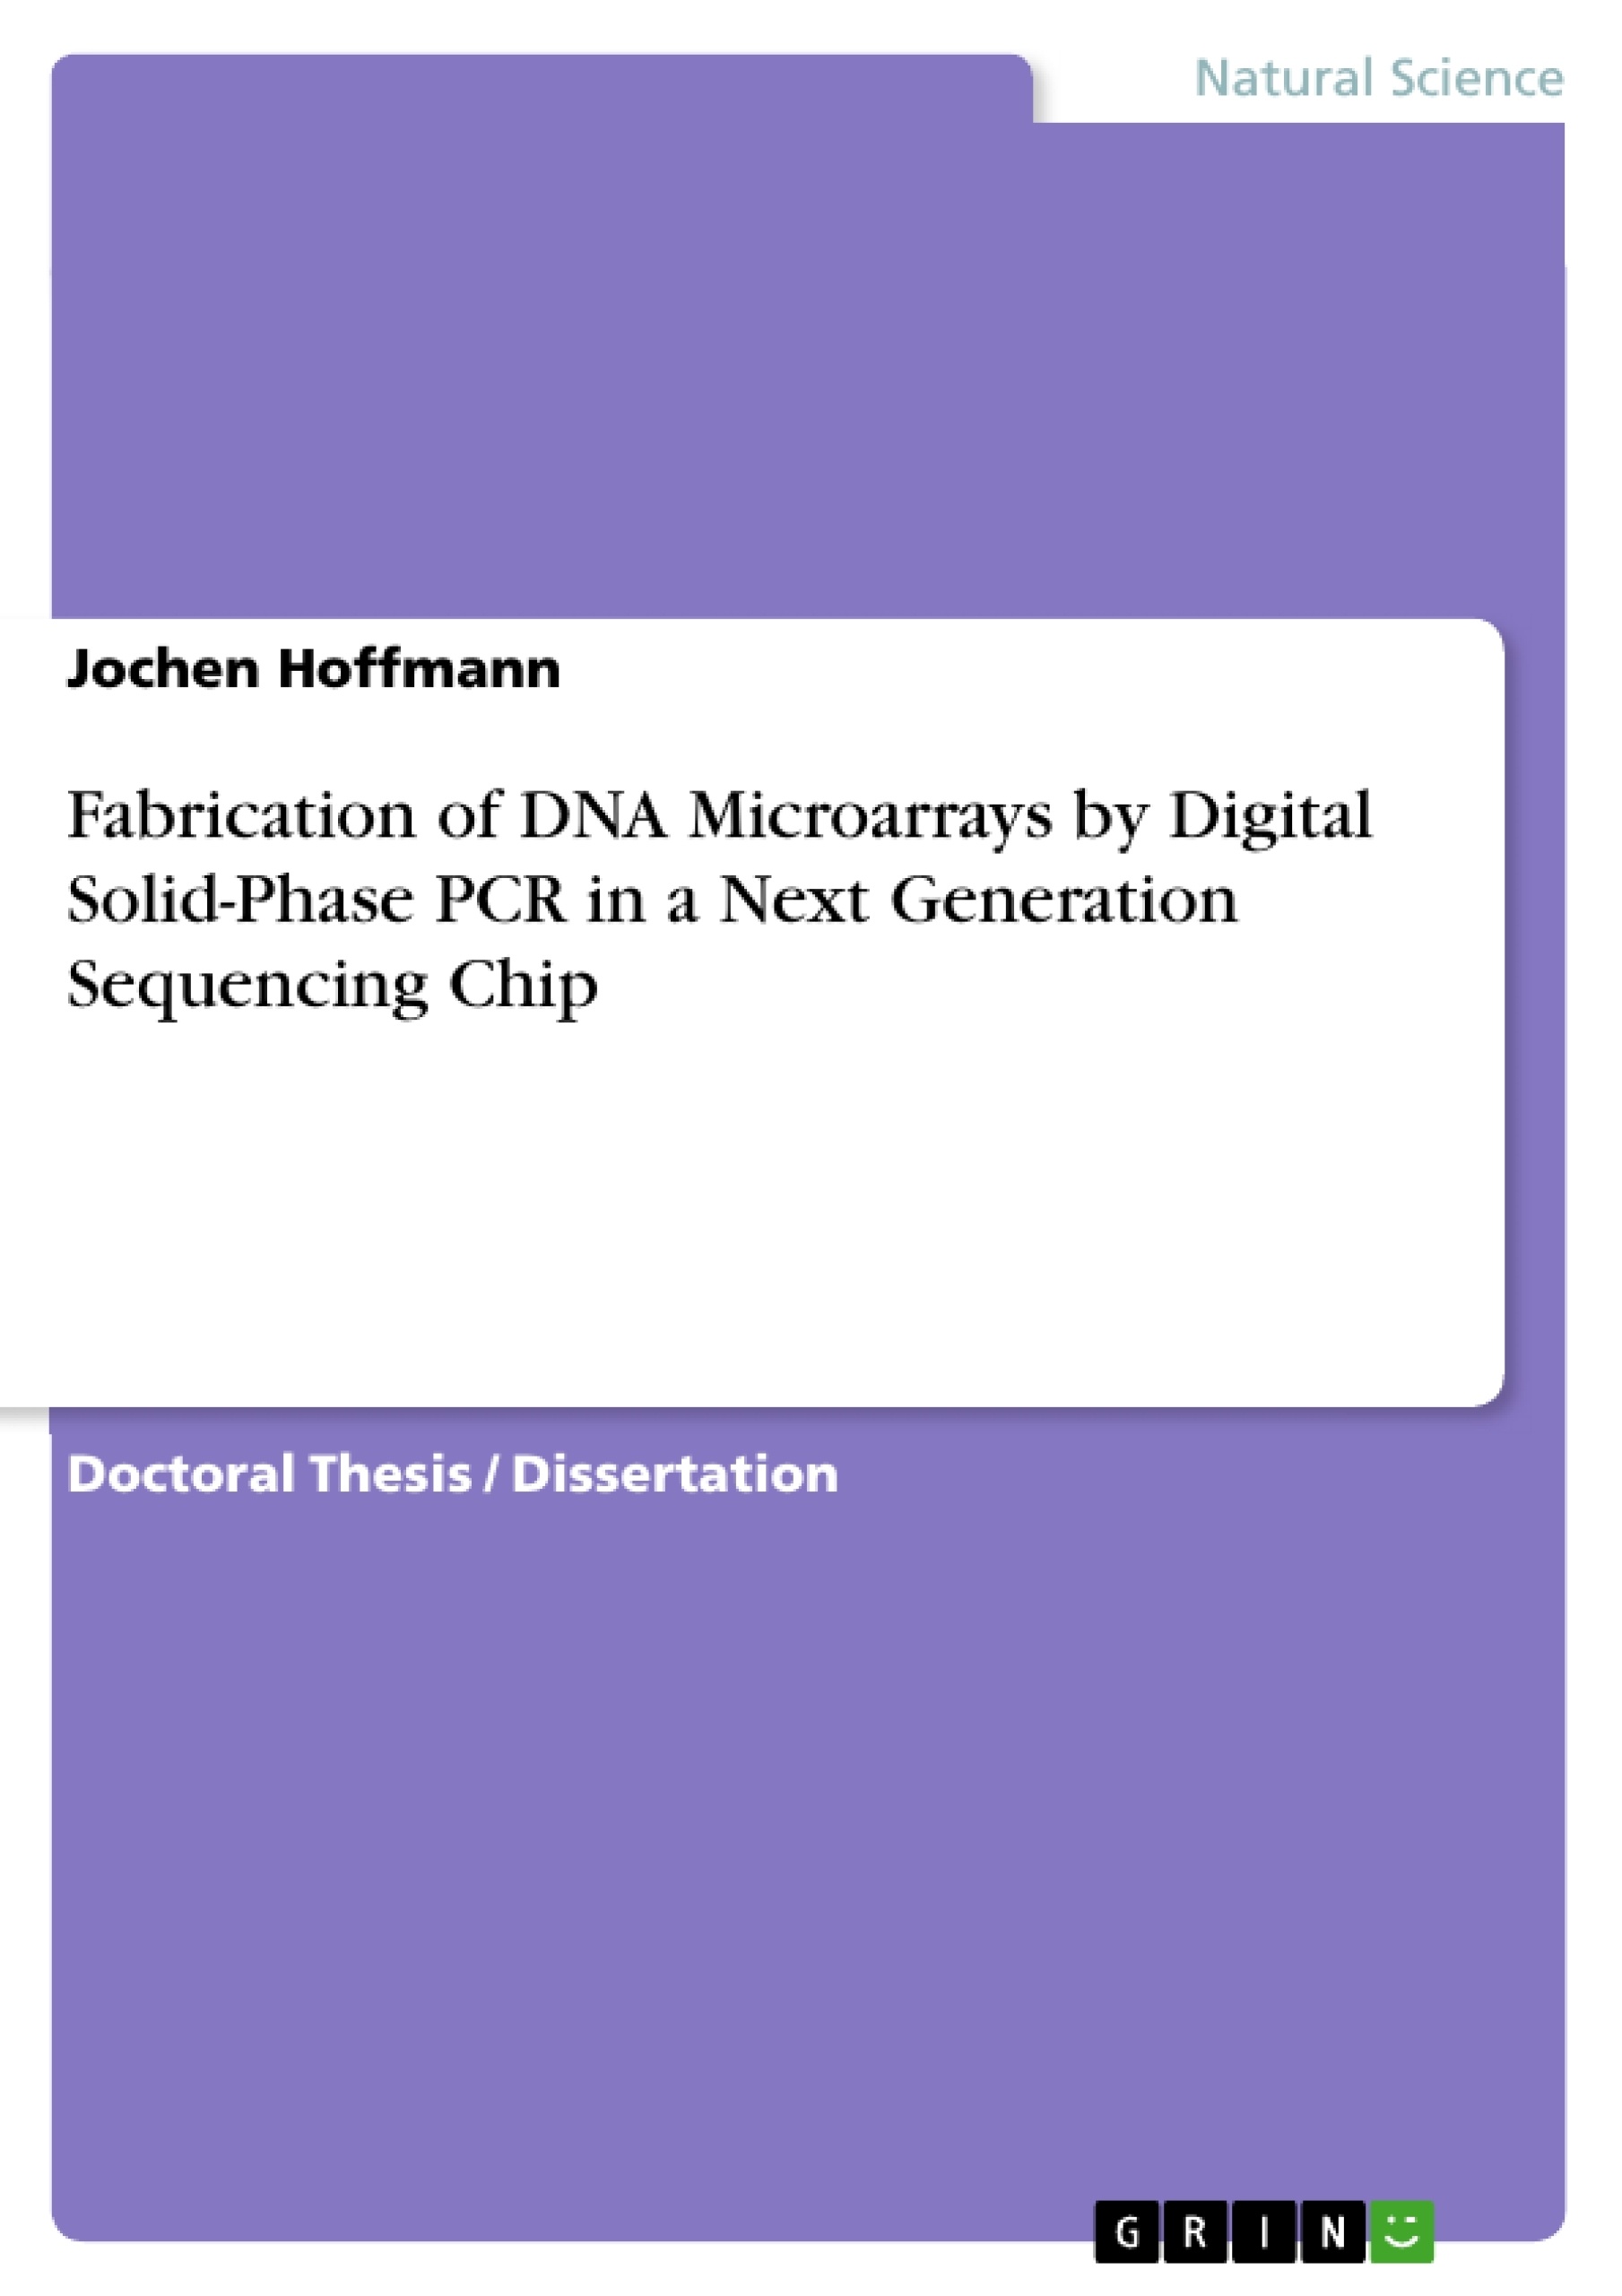 Title: Fabrication of DNA Microarrays by Digital Solid-Phase PCR in a Next Generation Sequencing Chip